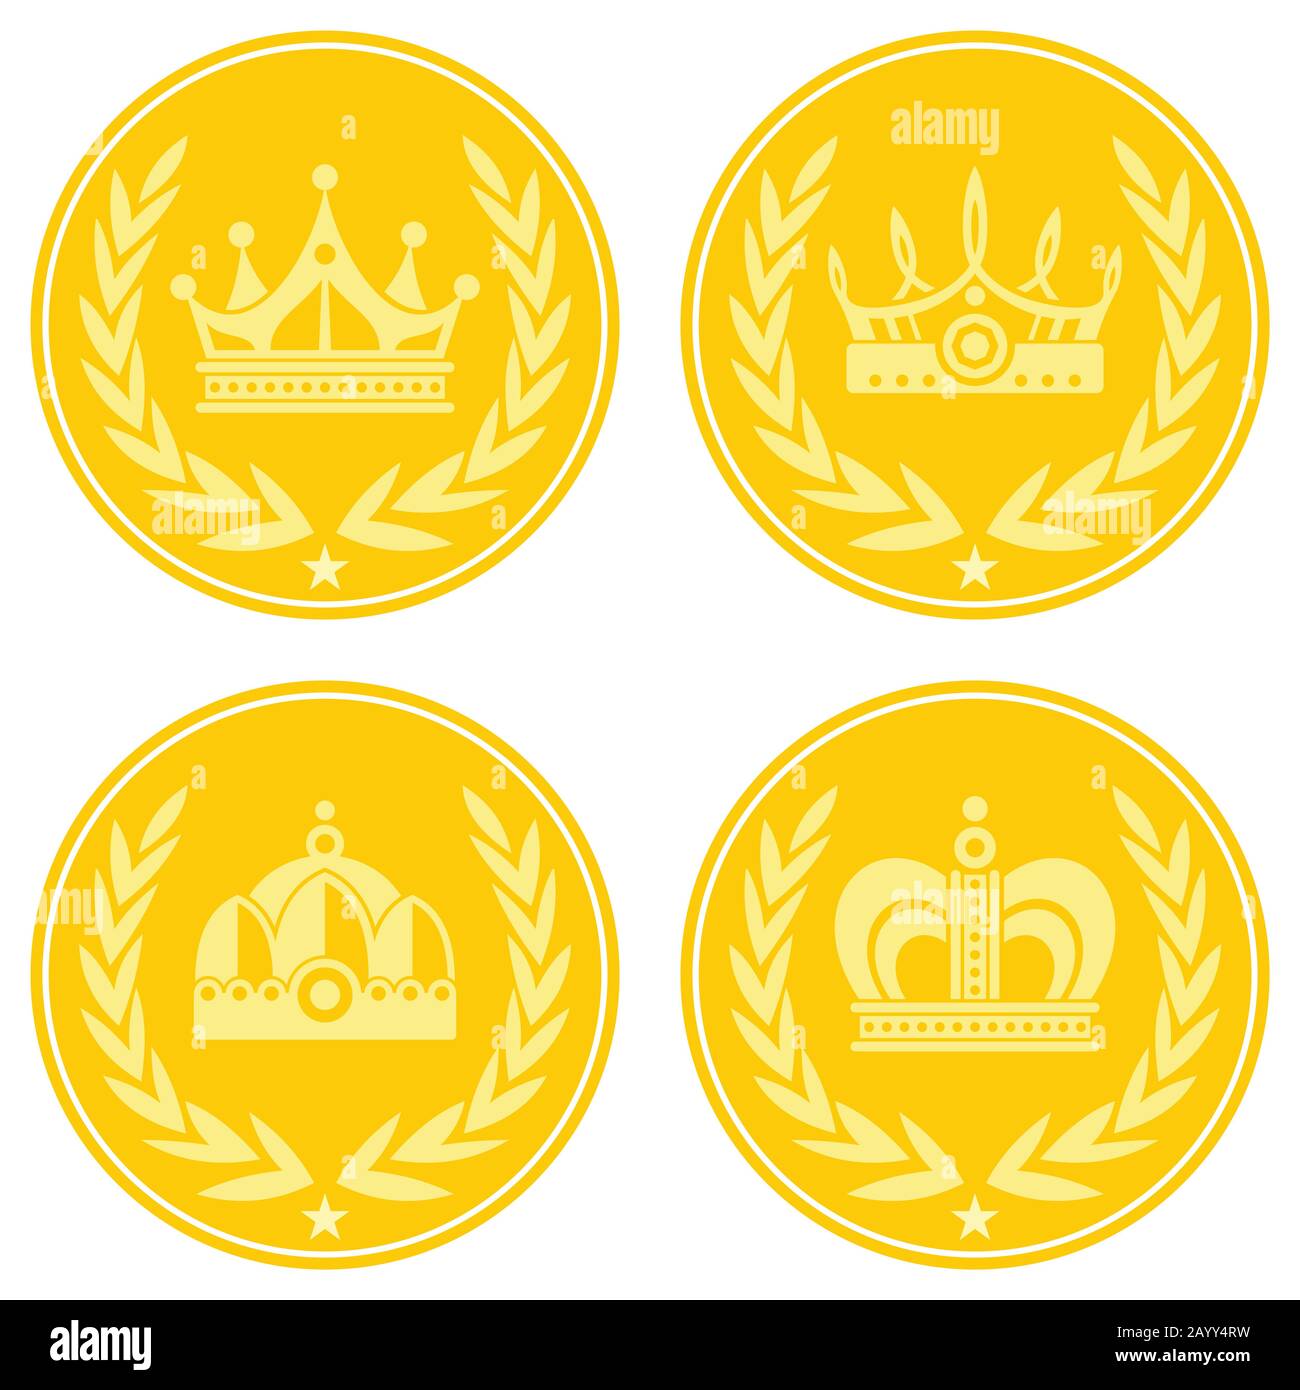 Yellow coin icons with crown on white background. Golden coin icon, vector illustration Stock Vector